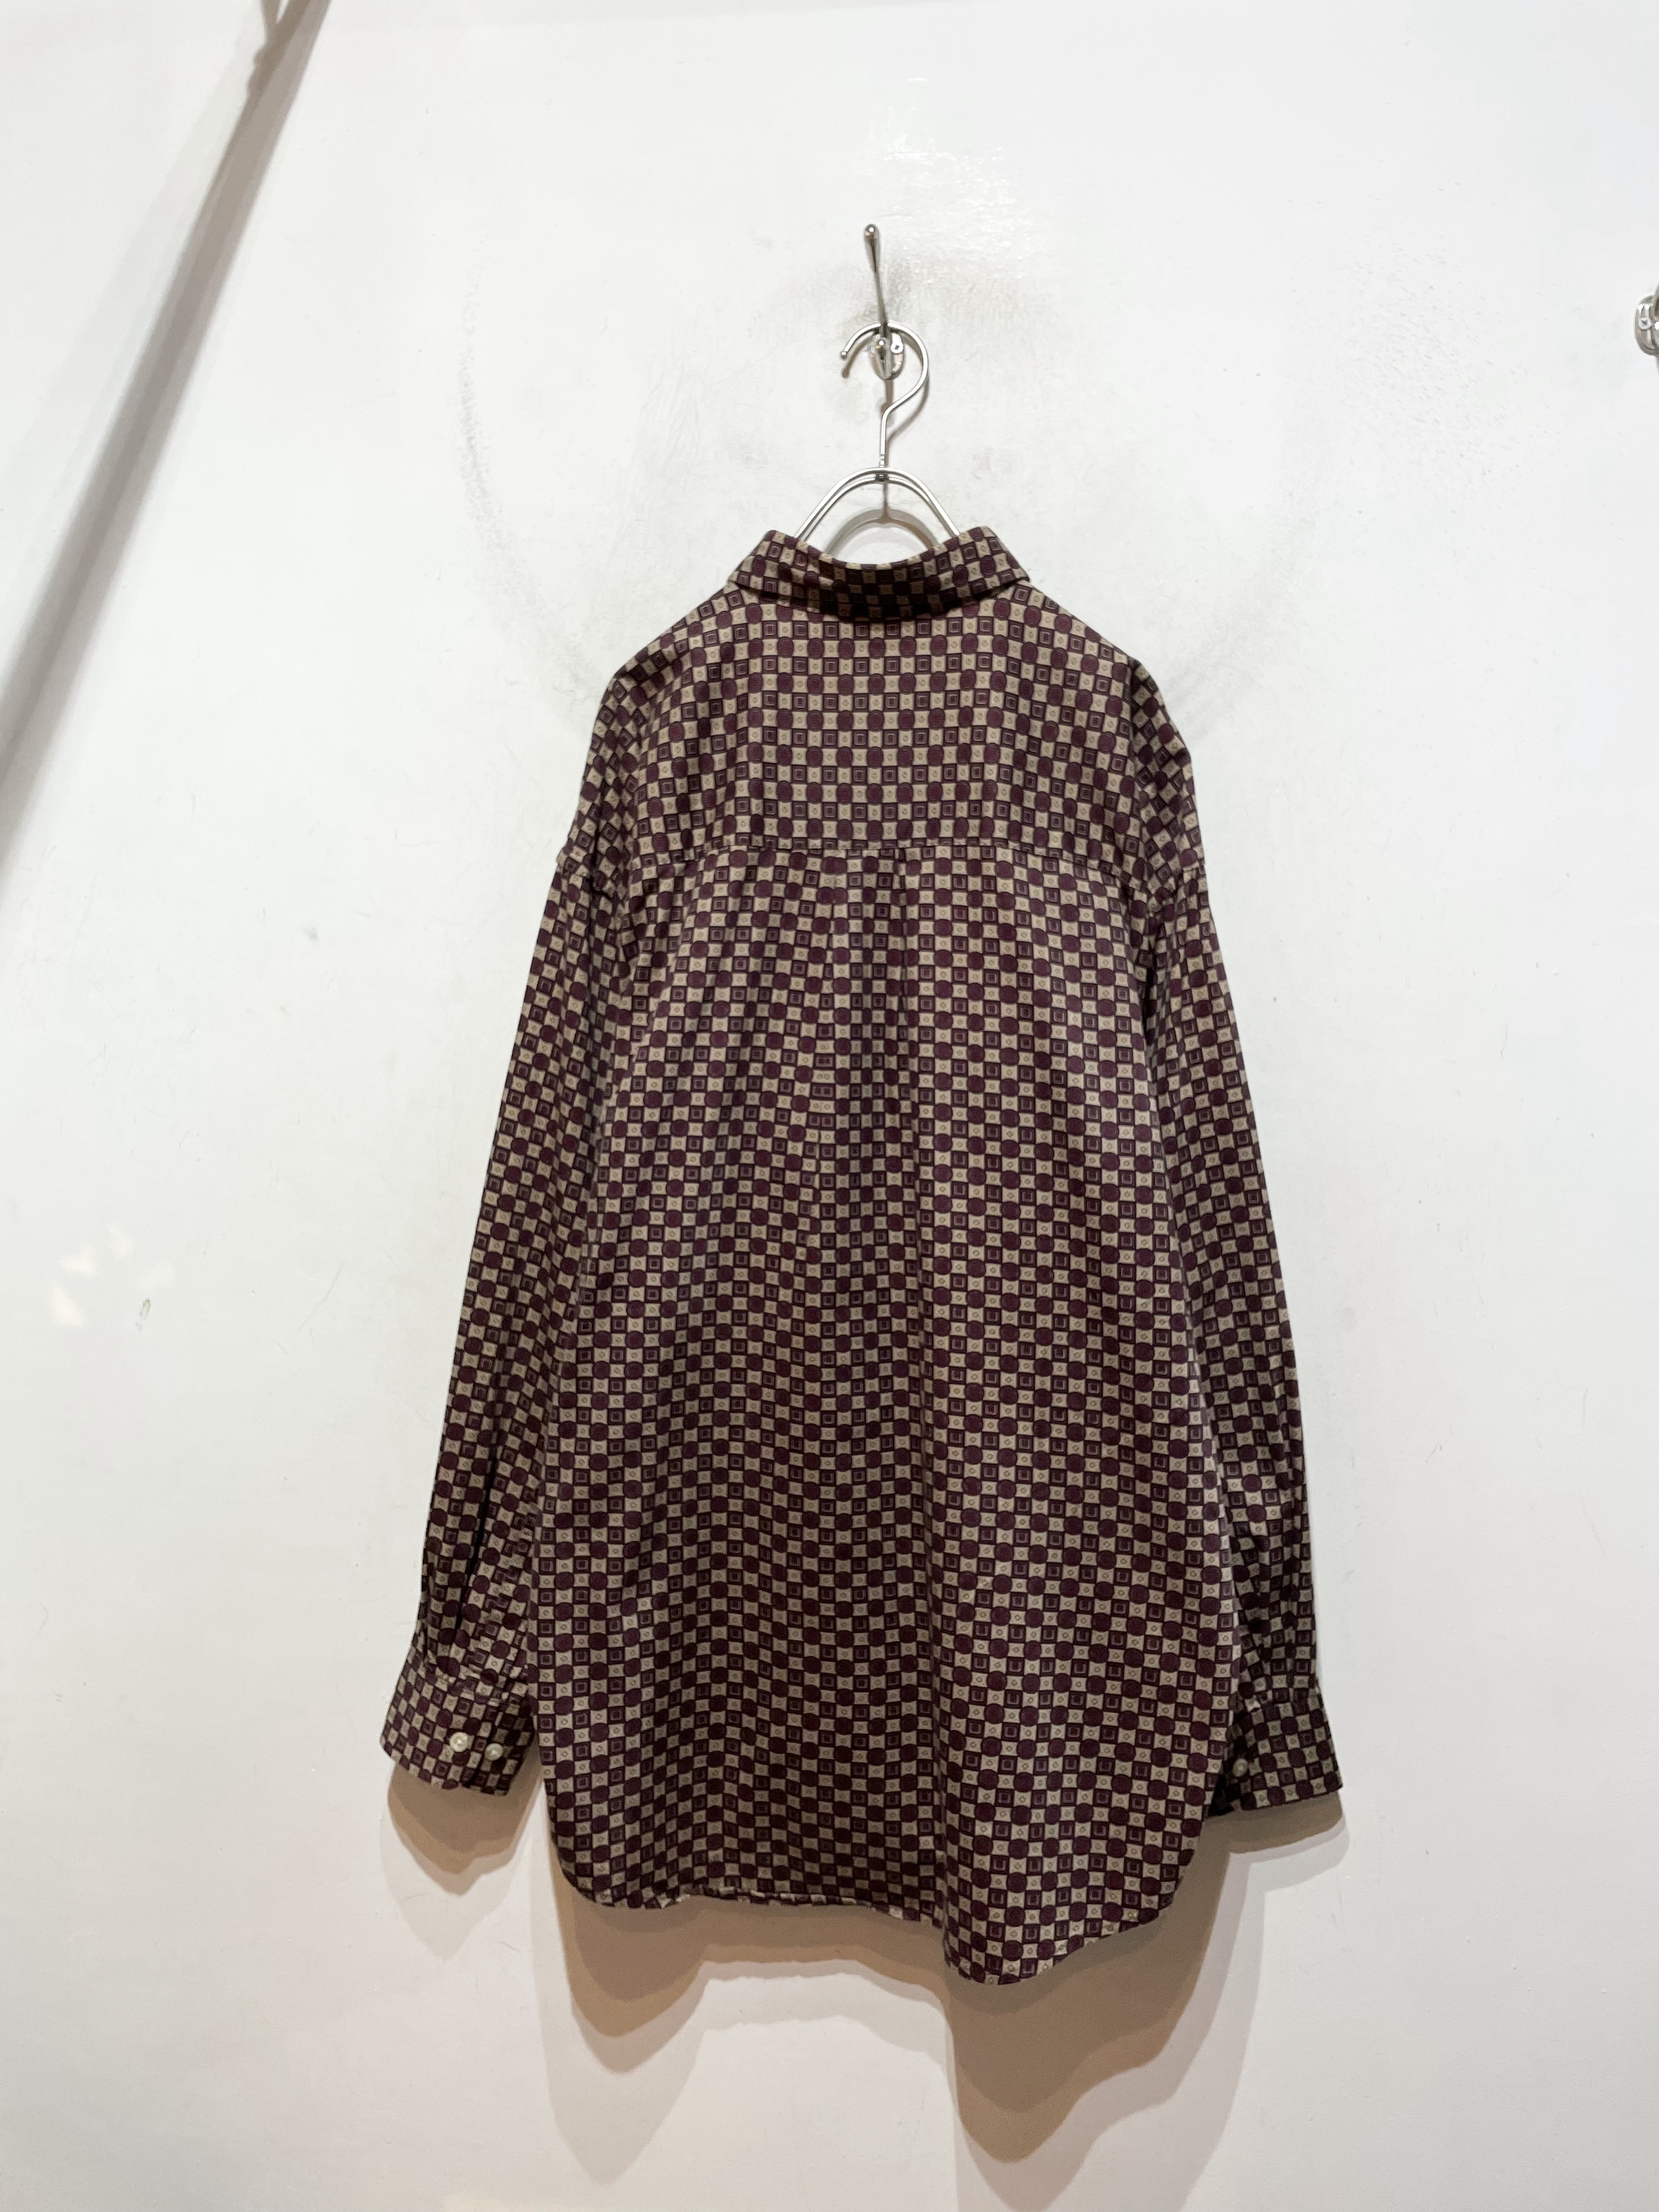 “NATURAL ISSUE” L/S Pattern Shirt